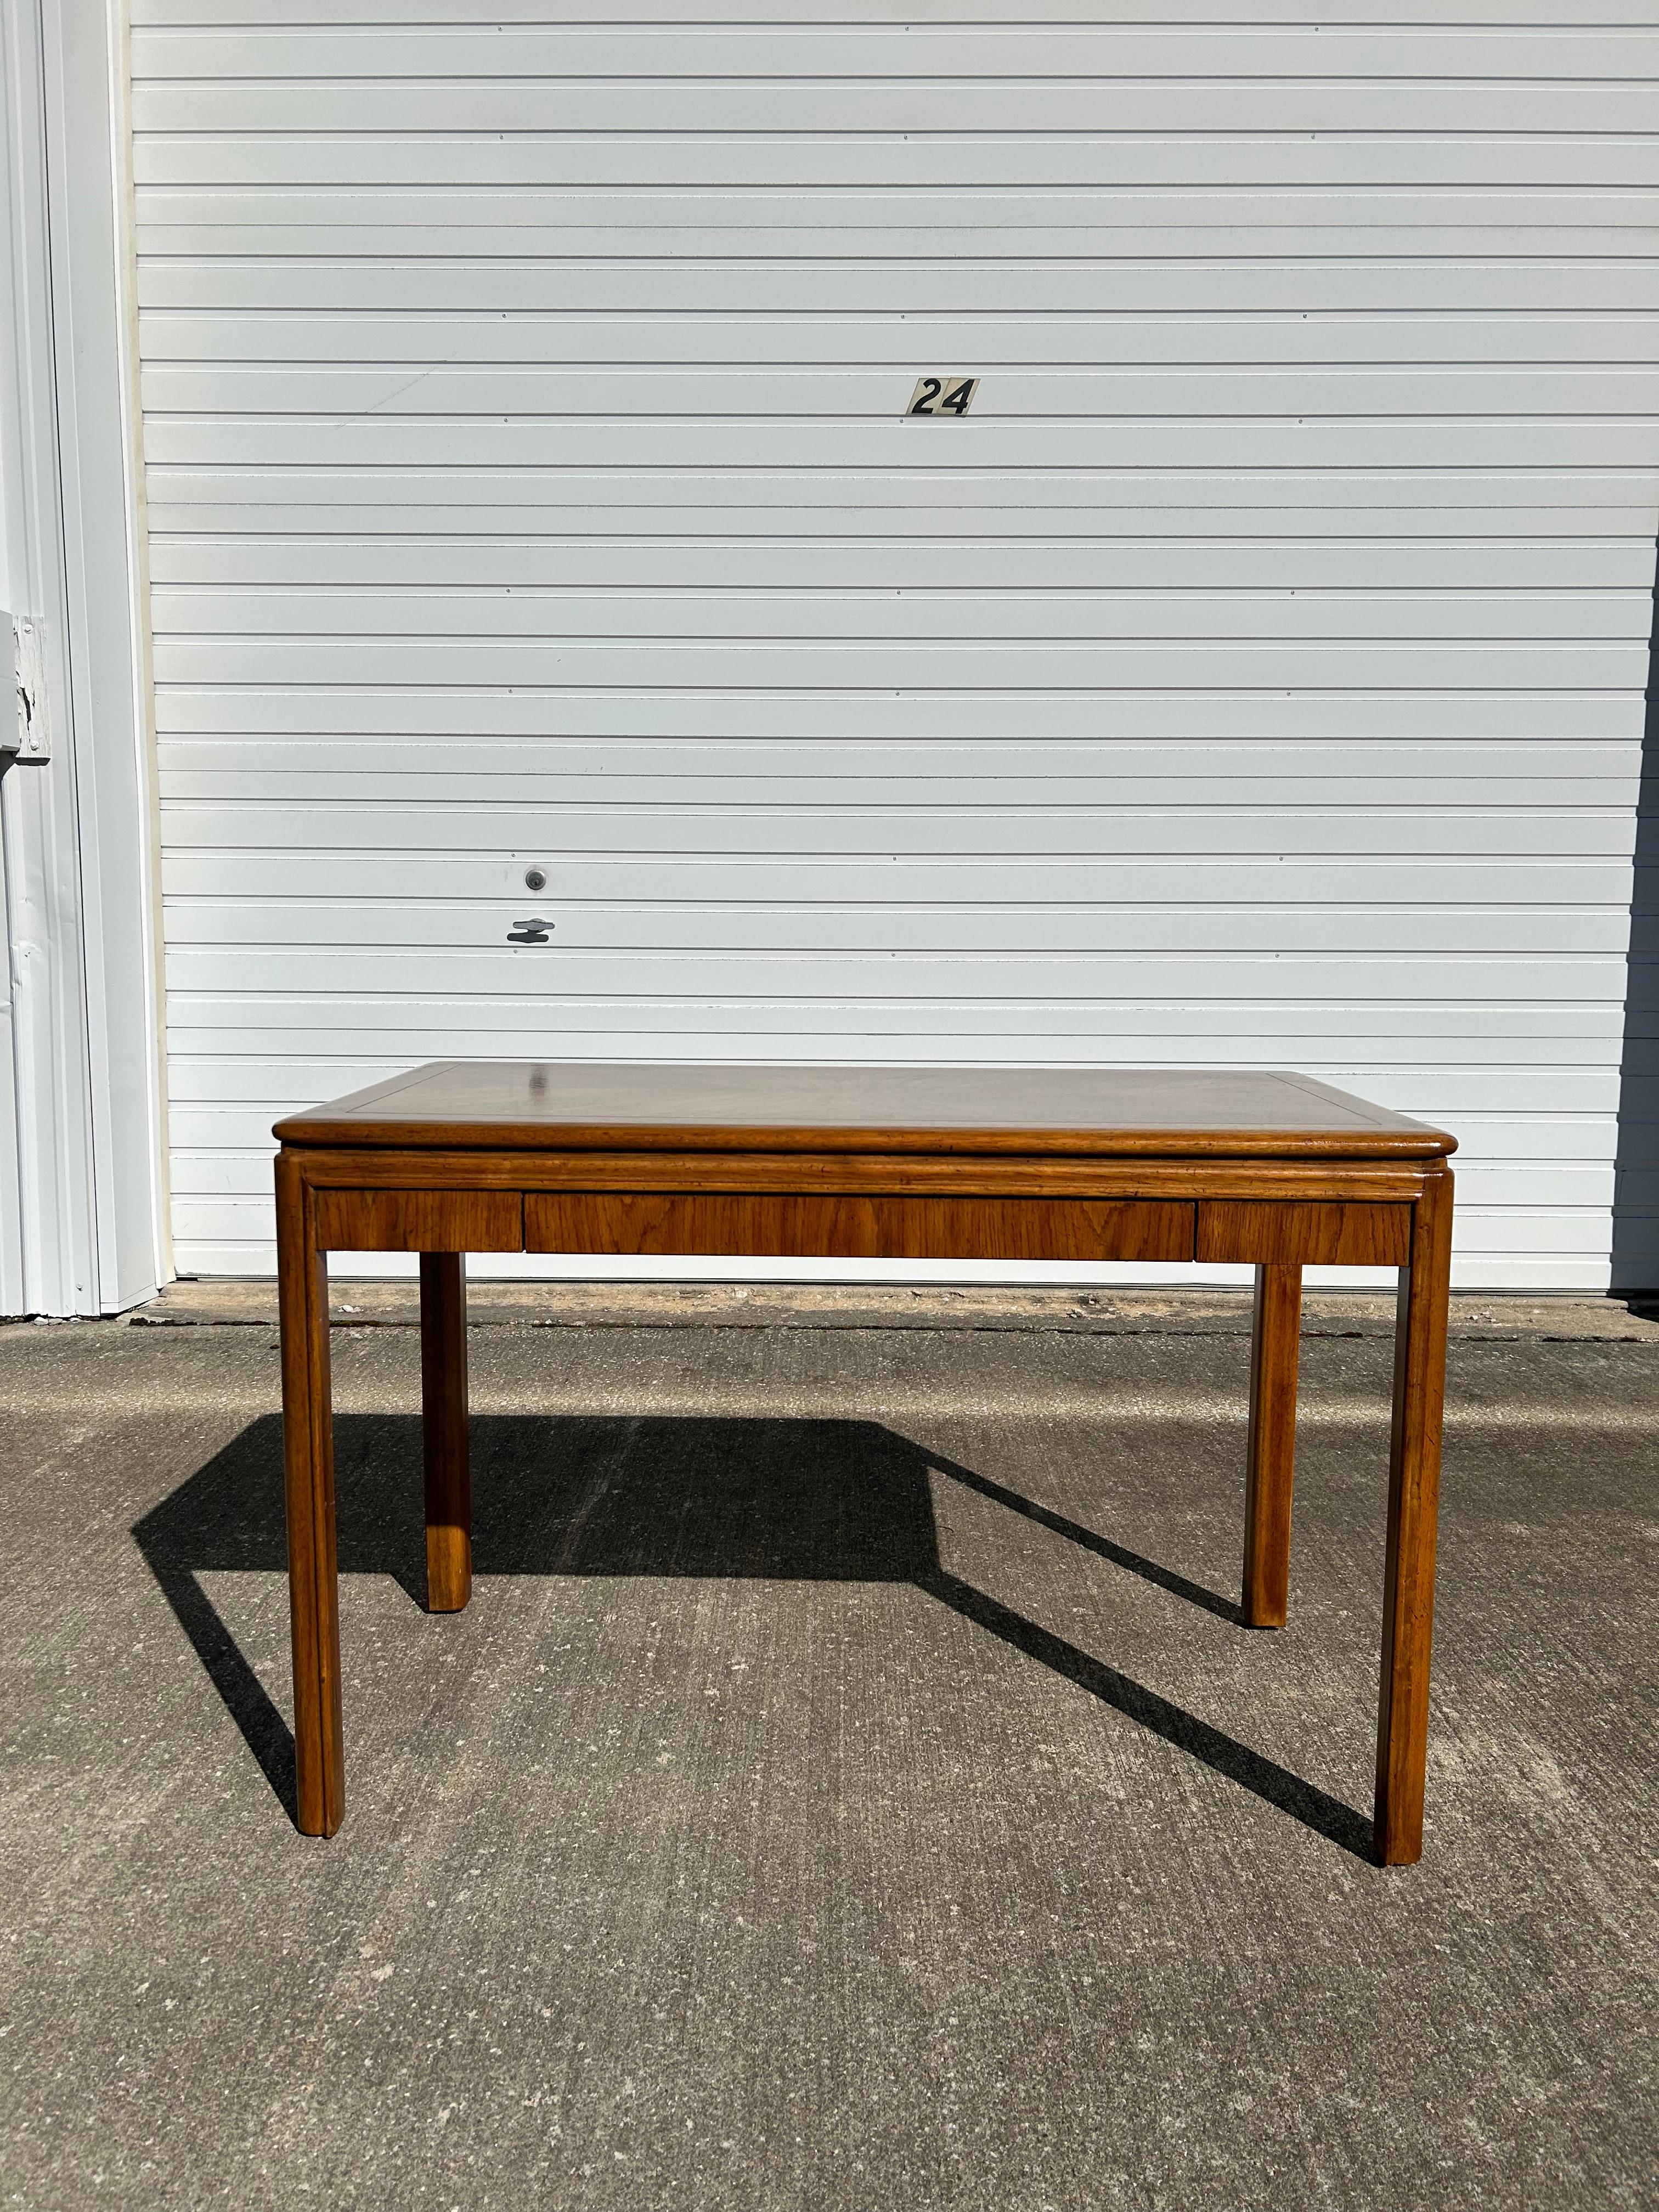 A beautiful and rare piece from Drexel Passage, a writing table or desk made to last for decades. (It can also be used as a console table) The wood design of the table is magnificently beautiful with a 